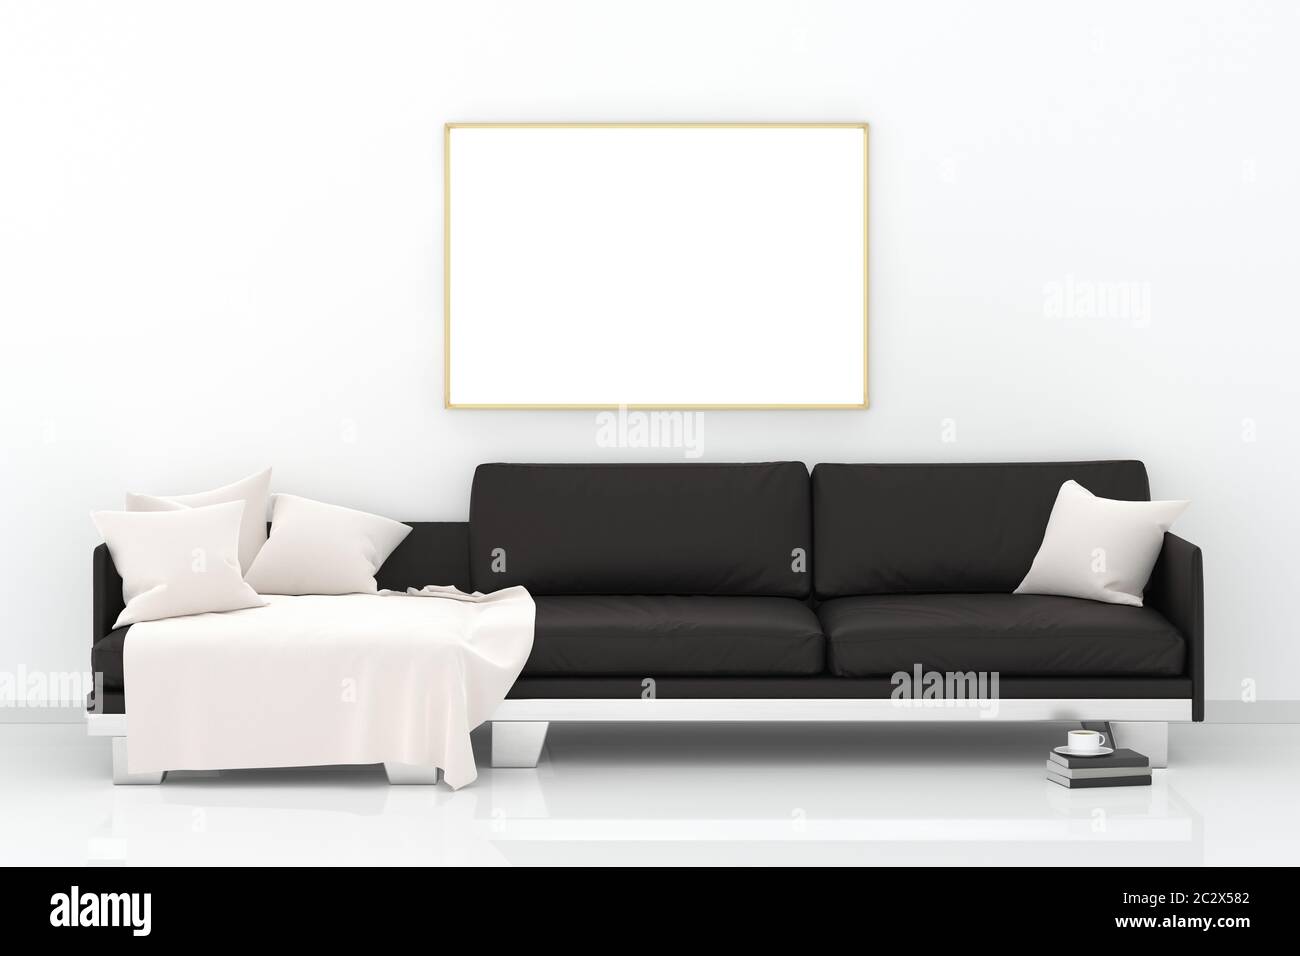 Mock up canvas poster print with black couch sofa, pillow, books and tea cup. Clean white wall Background. Stock Photo